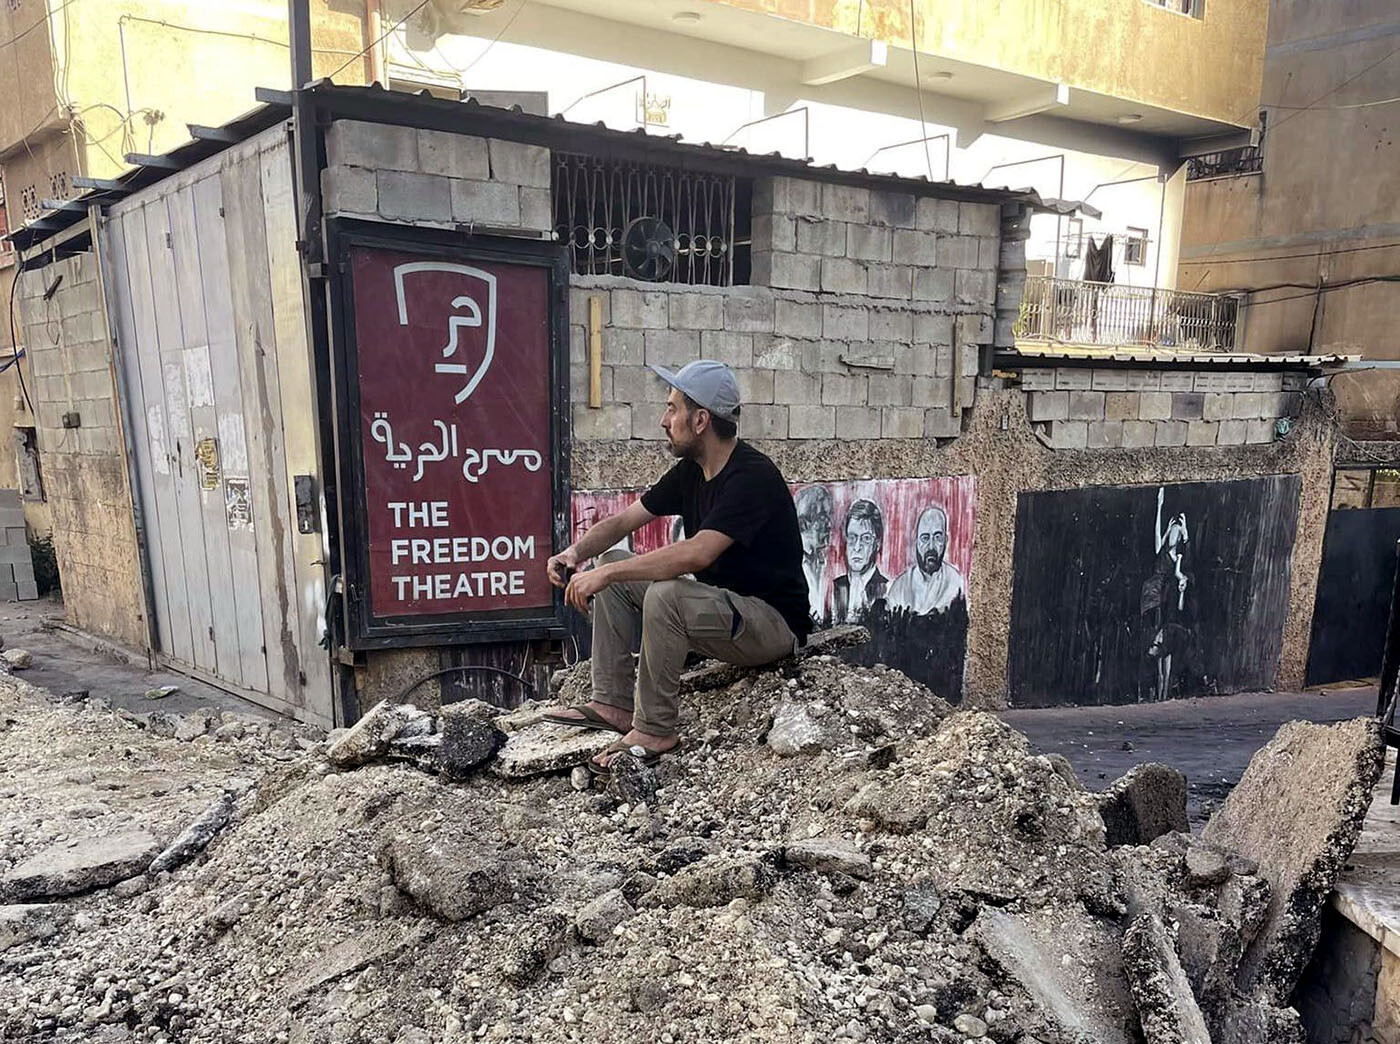 A man sits on a pile of rubble in front of a sign reading The Freedom Theatre.